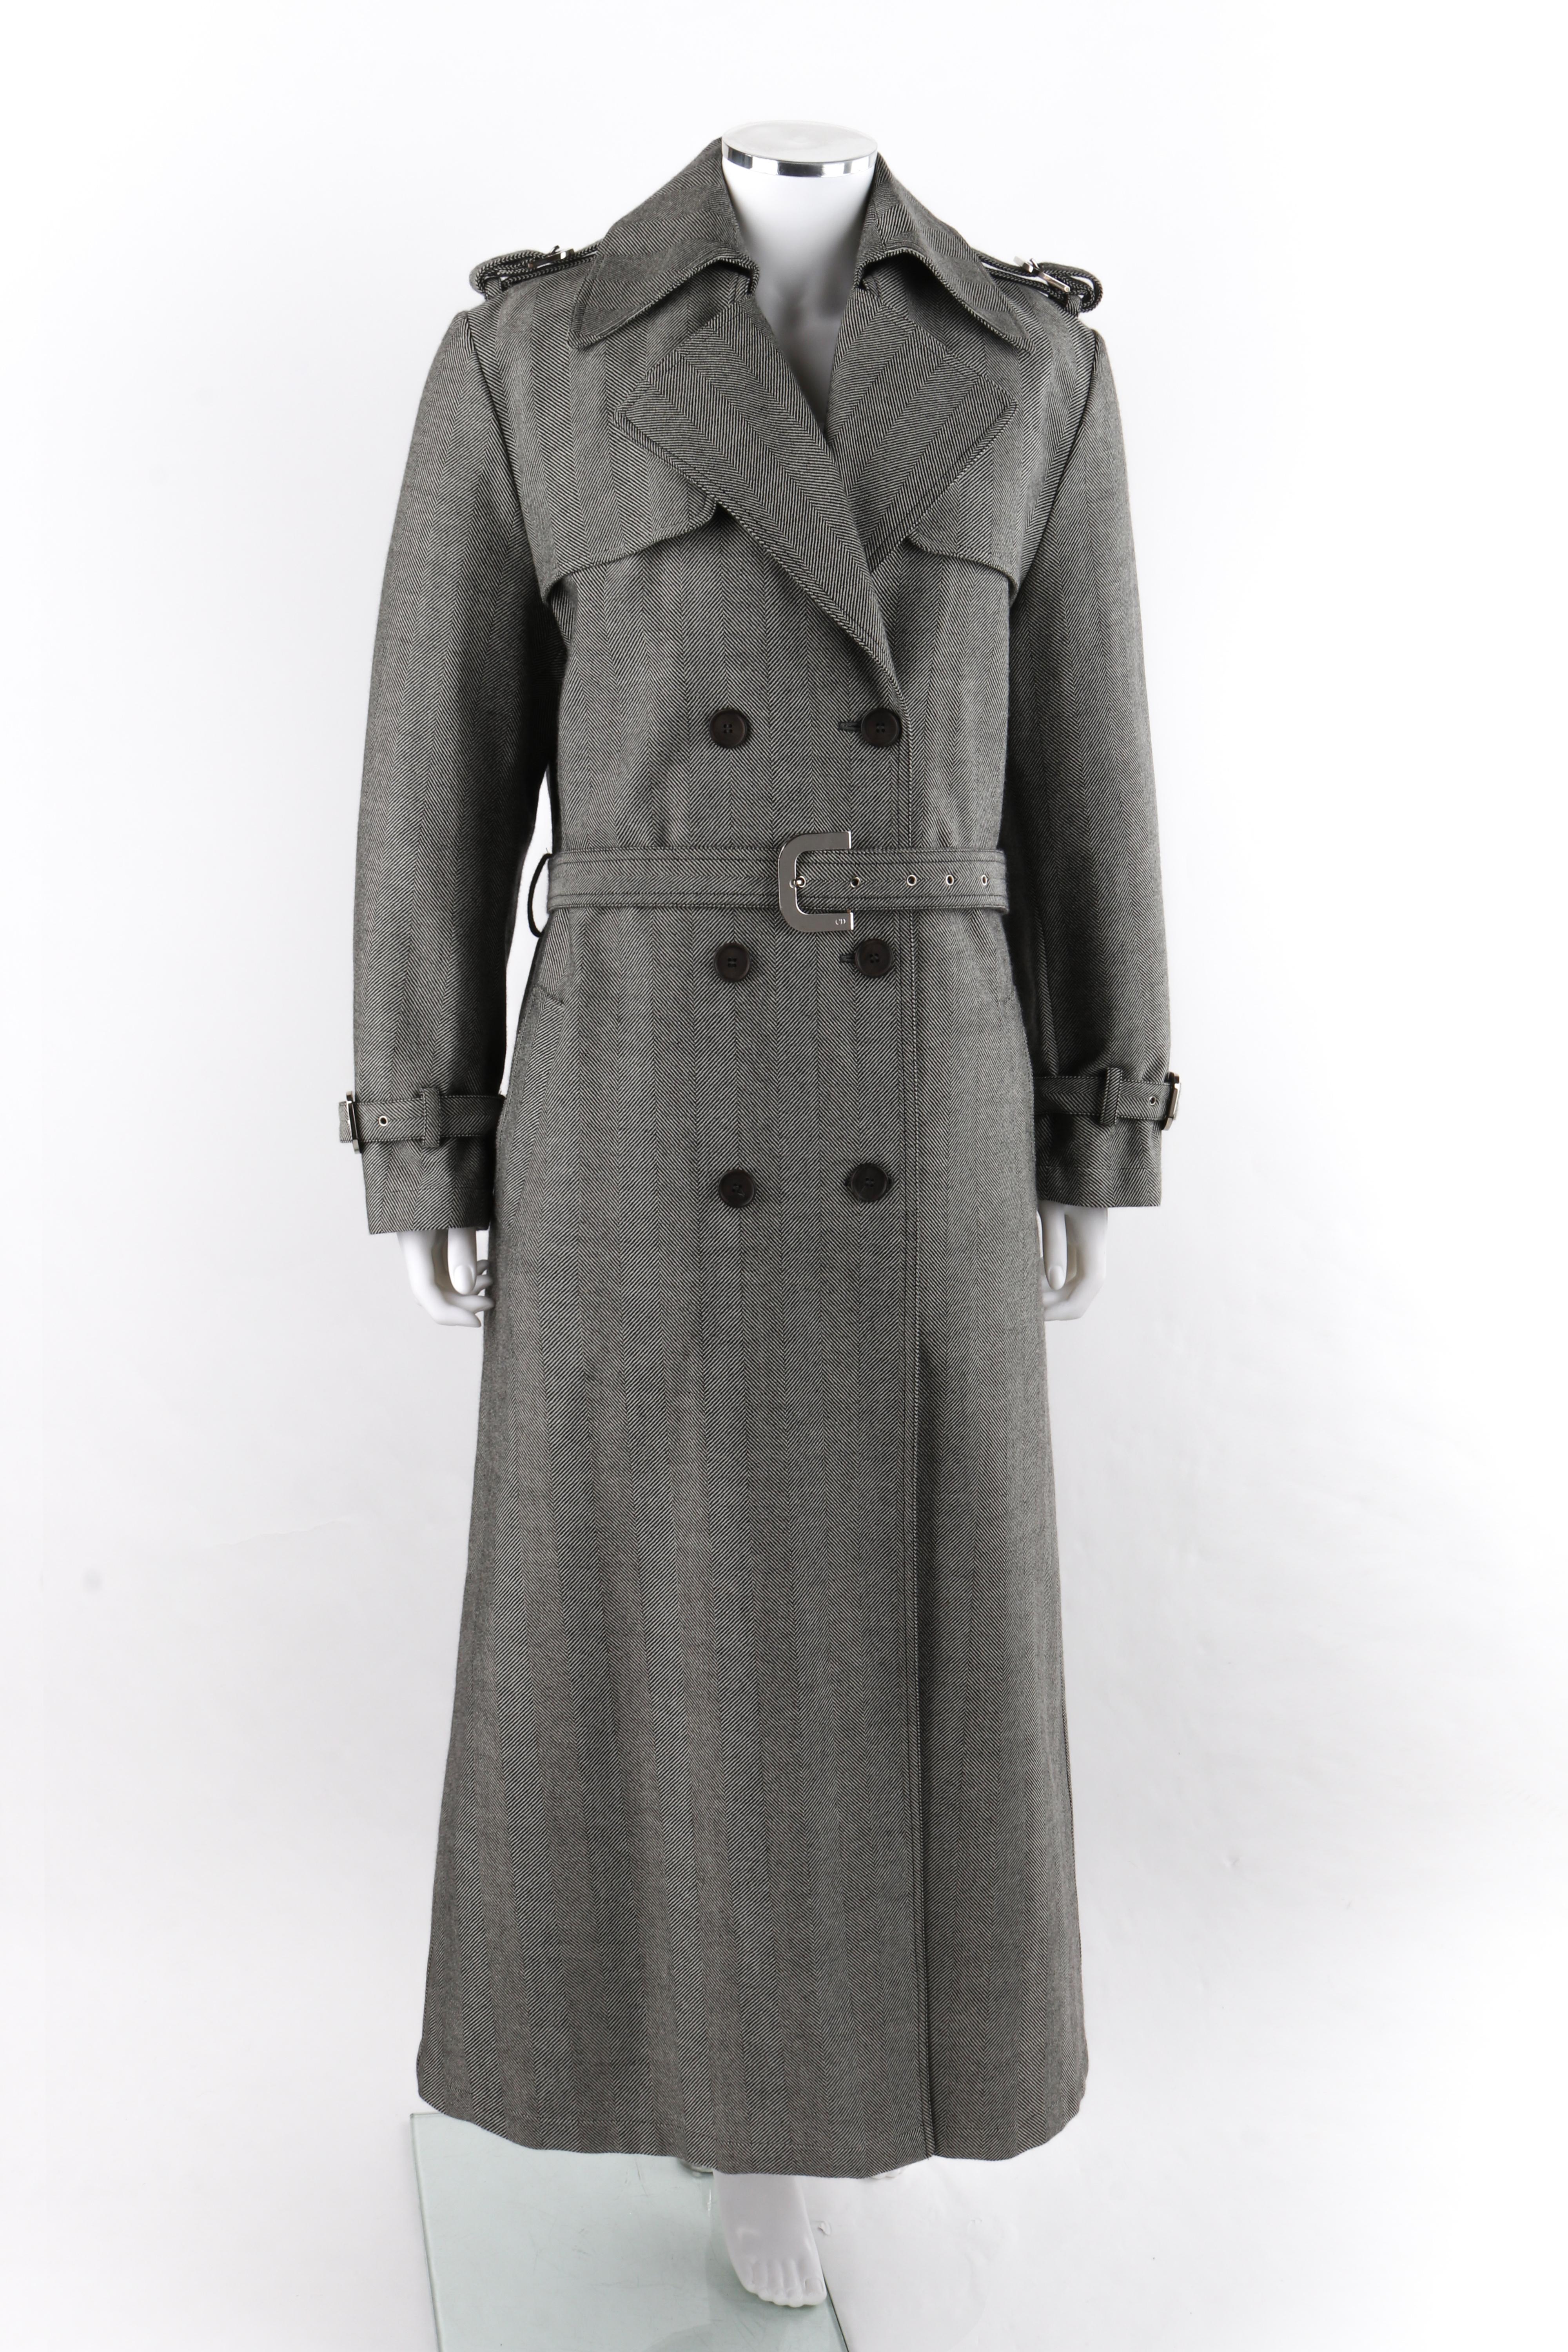 Gray CHRISTIAN DIOR Boutique c.2000’s Herringbone Double Breasted Belted Trench Coat